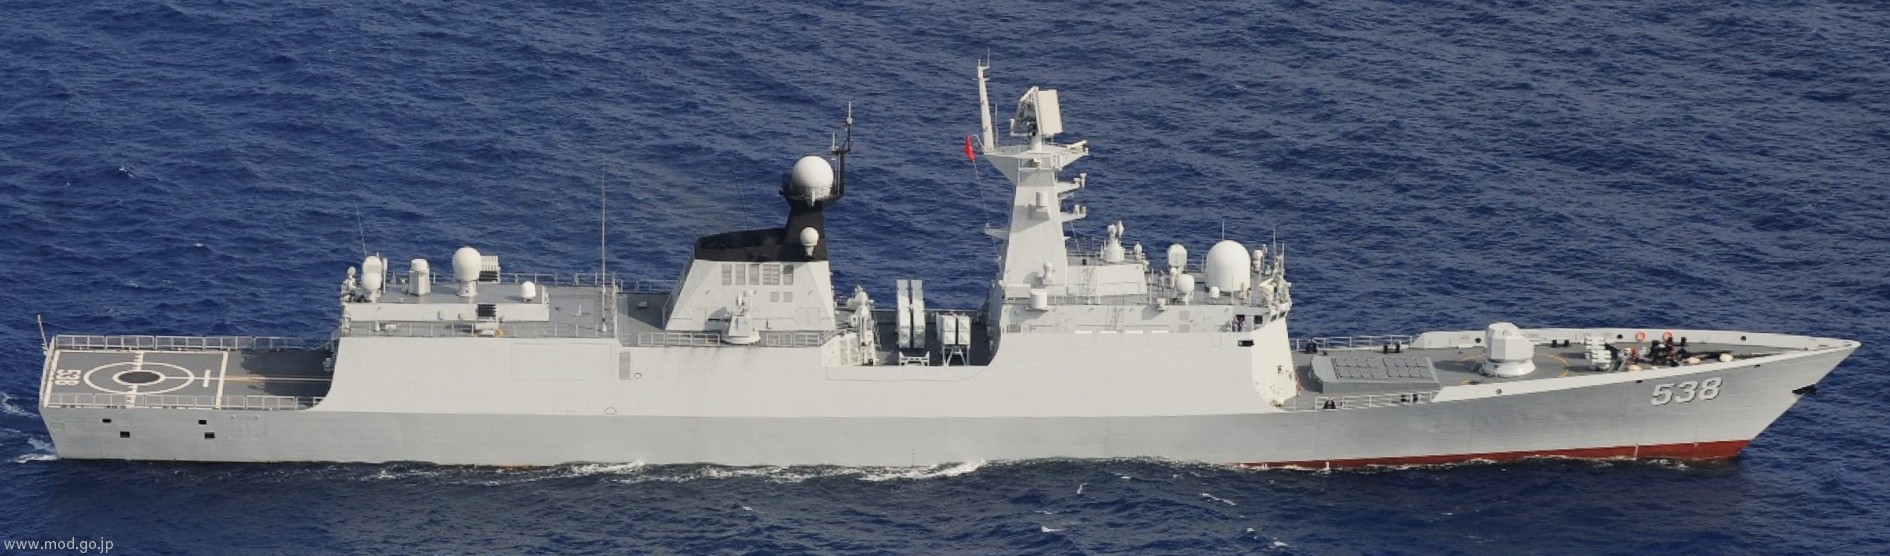 ffg-538 plans yantai type 054a jiangkai ii class guided missile frigate china people's liberation army navy 02